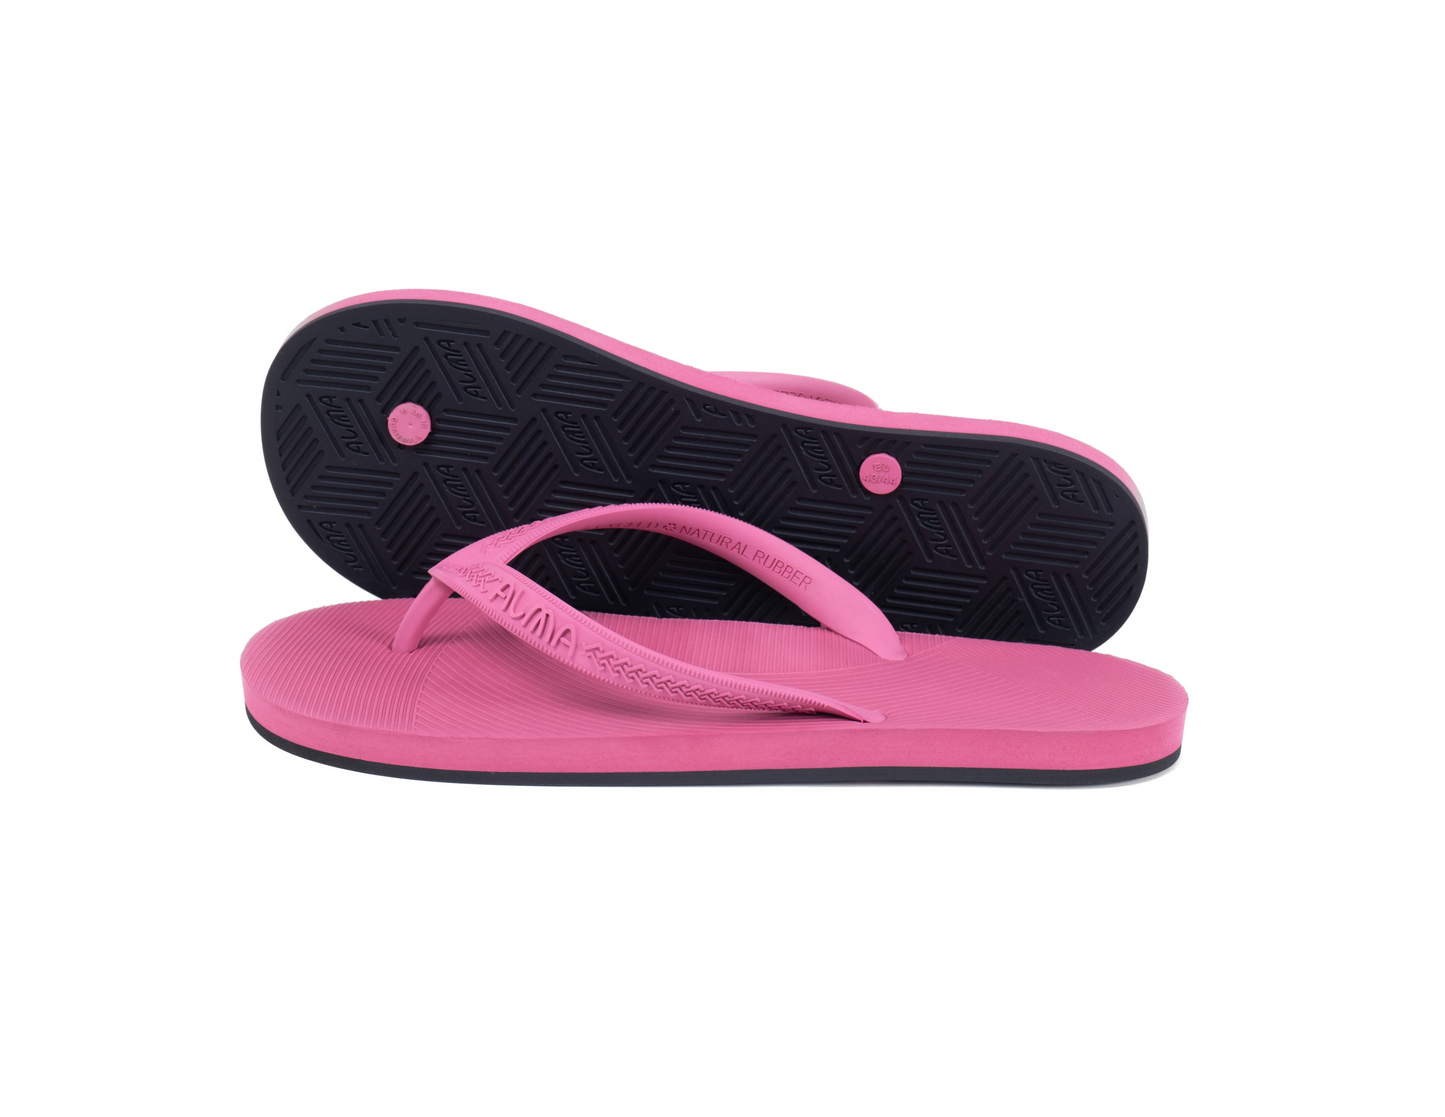 Women's Recycled Tire Sole Flip Flop - Rose